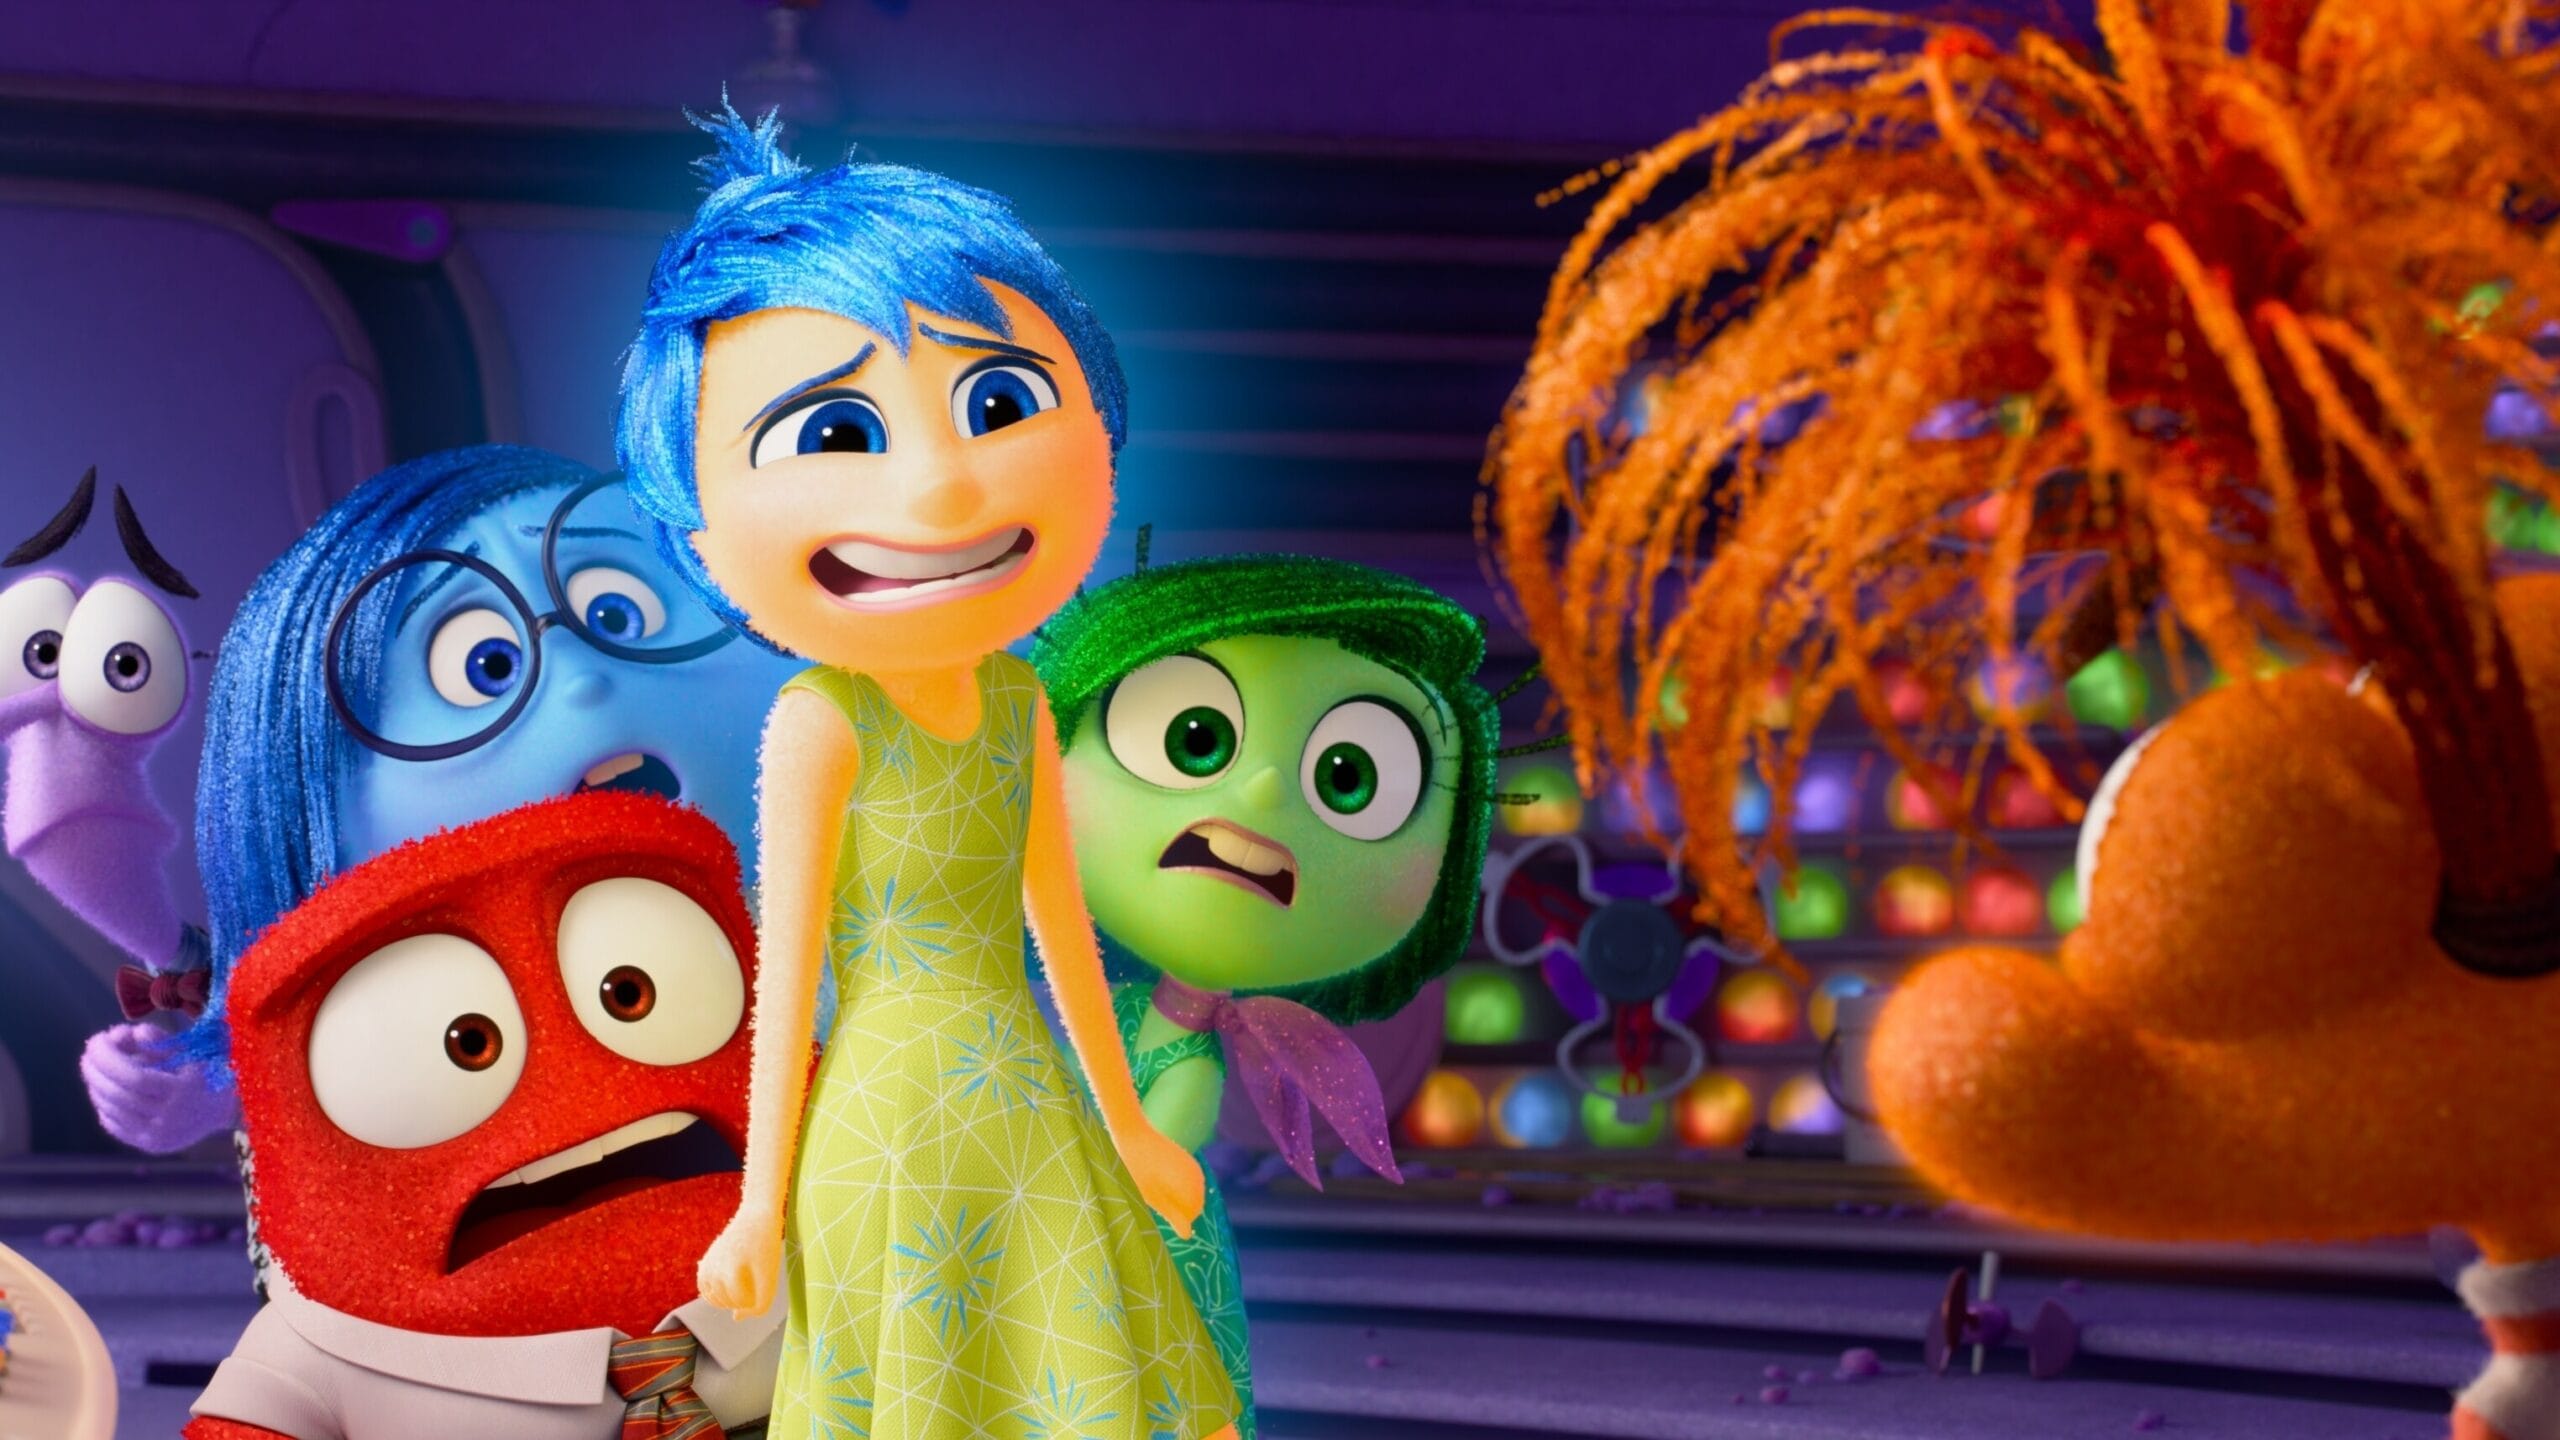 A parent’s guide to 'Inside Out 2': What to know before seeing the movie with kids